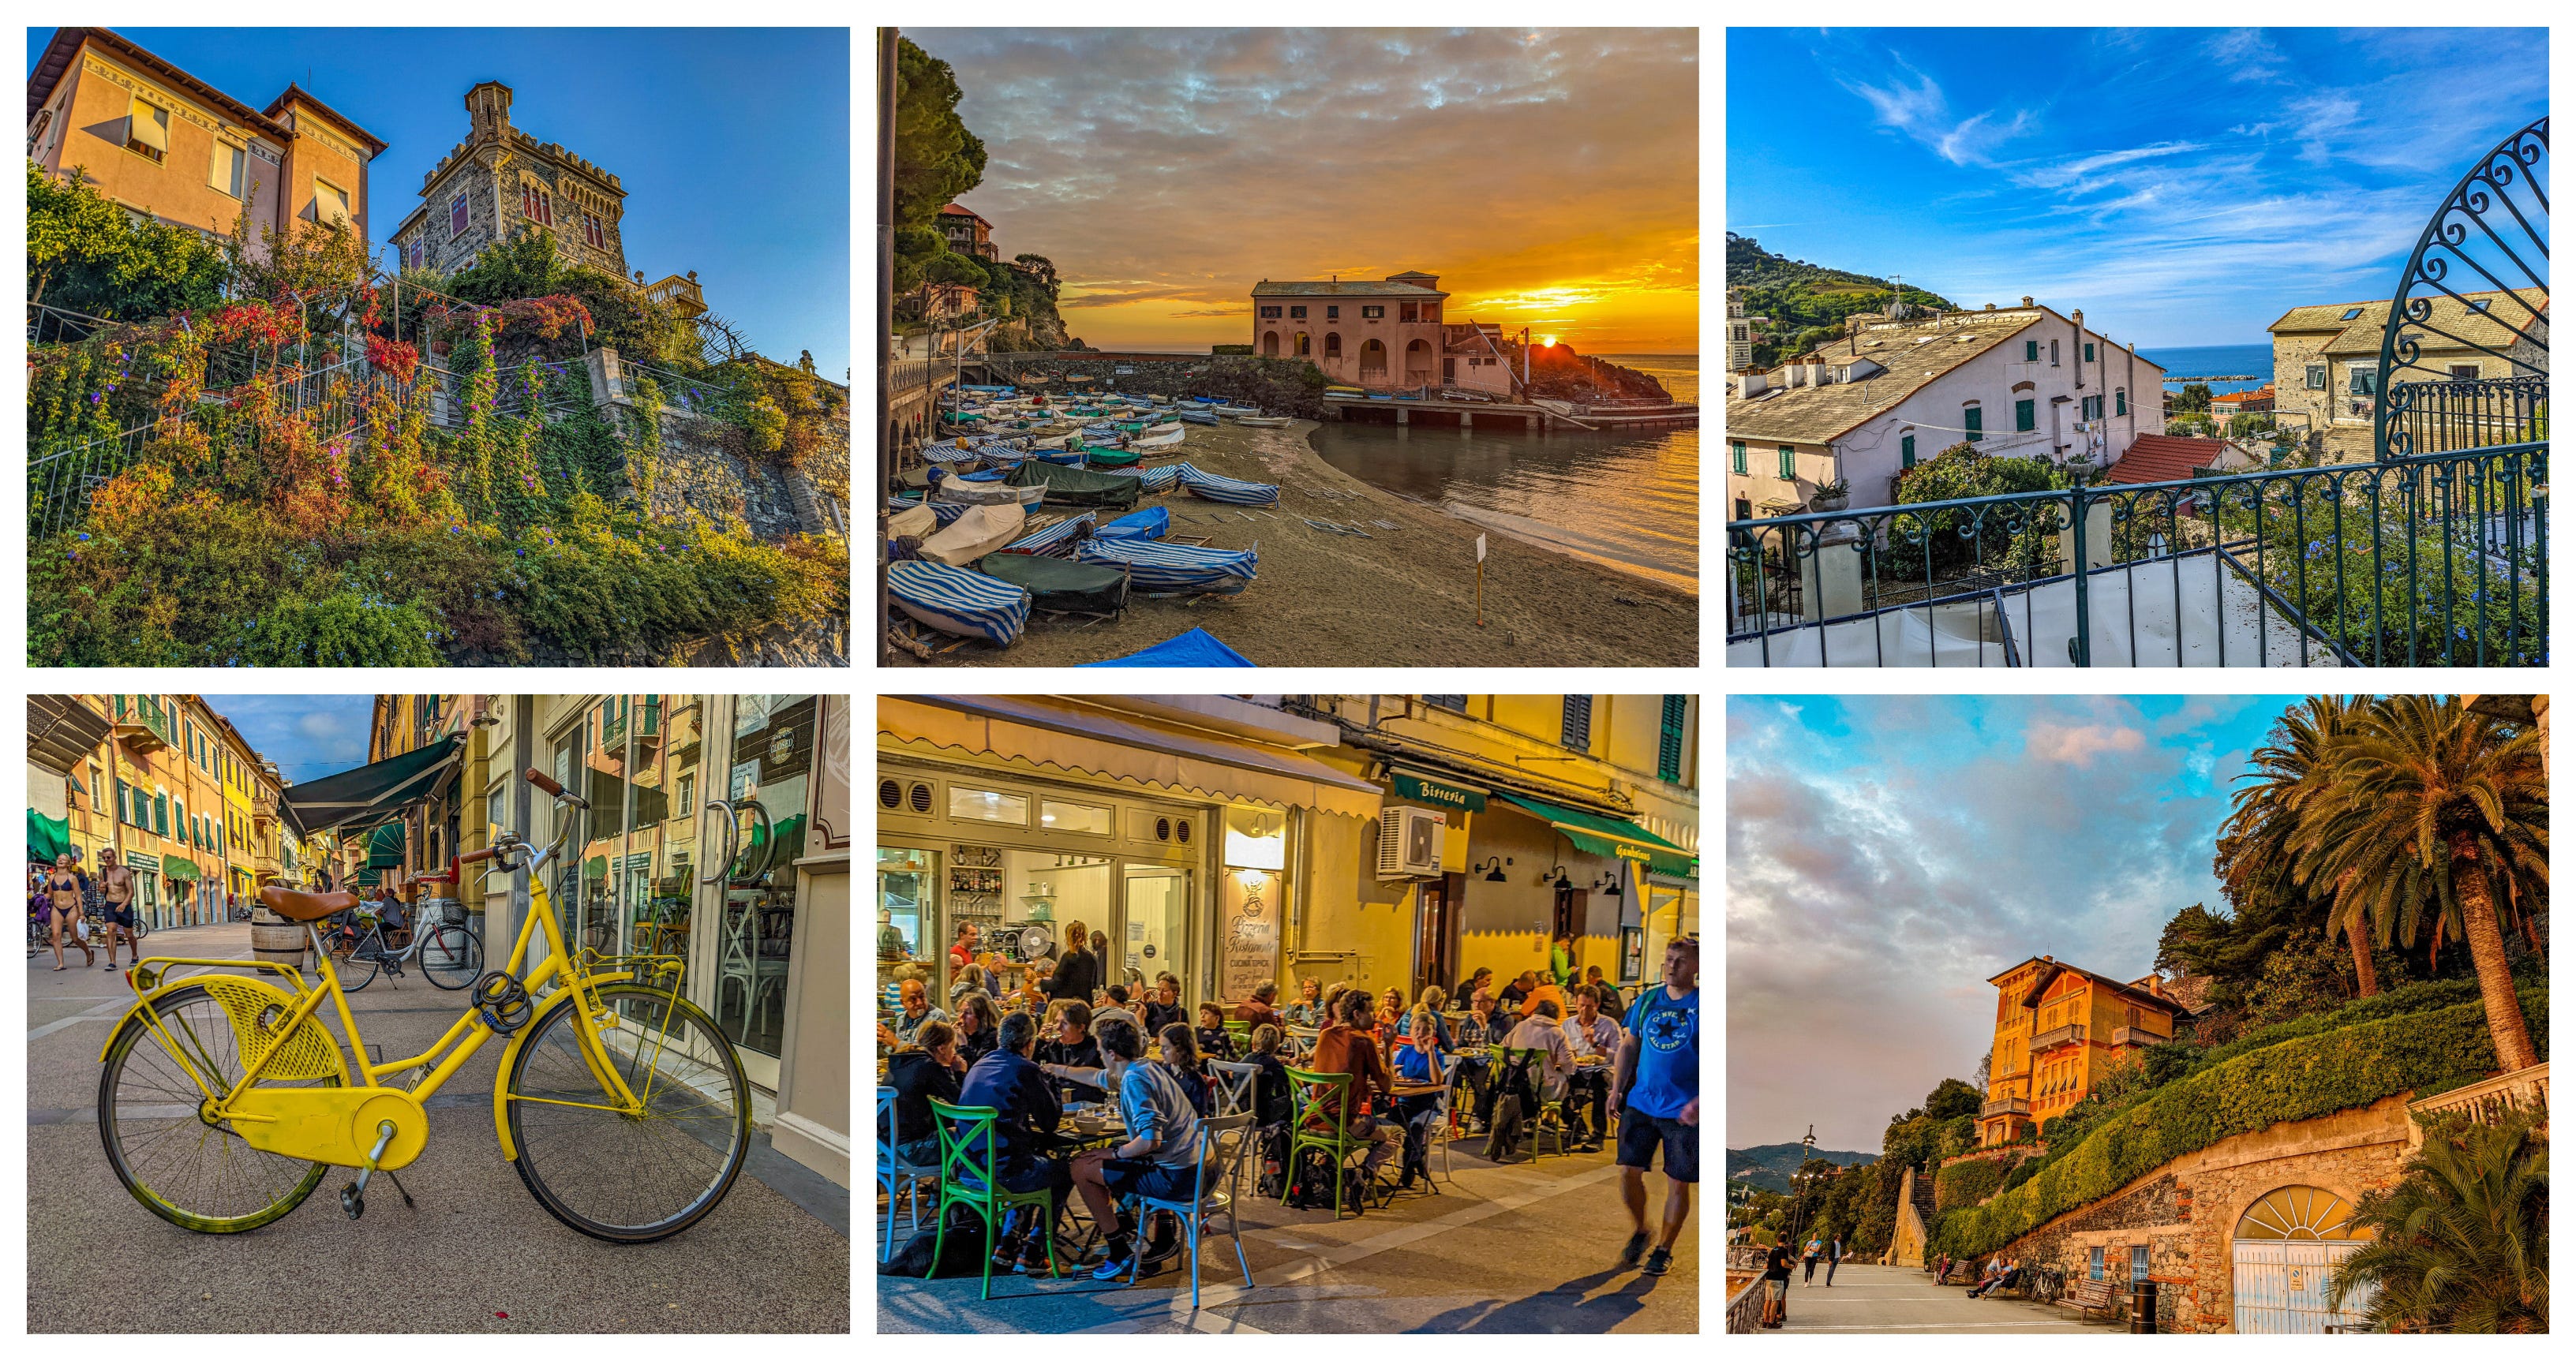 Tired of a dreary winter? Let photos of Italy's Cinque Terre